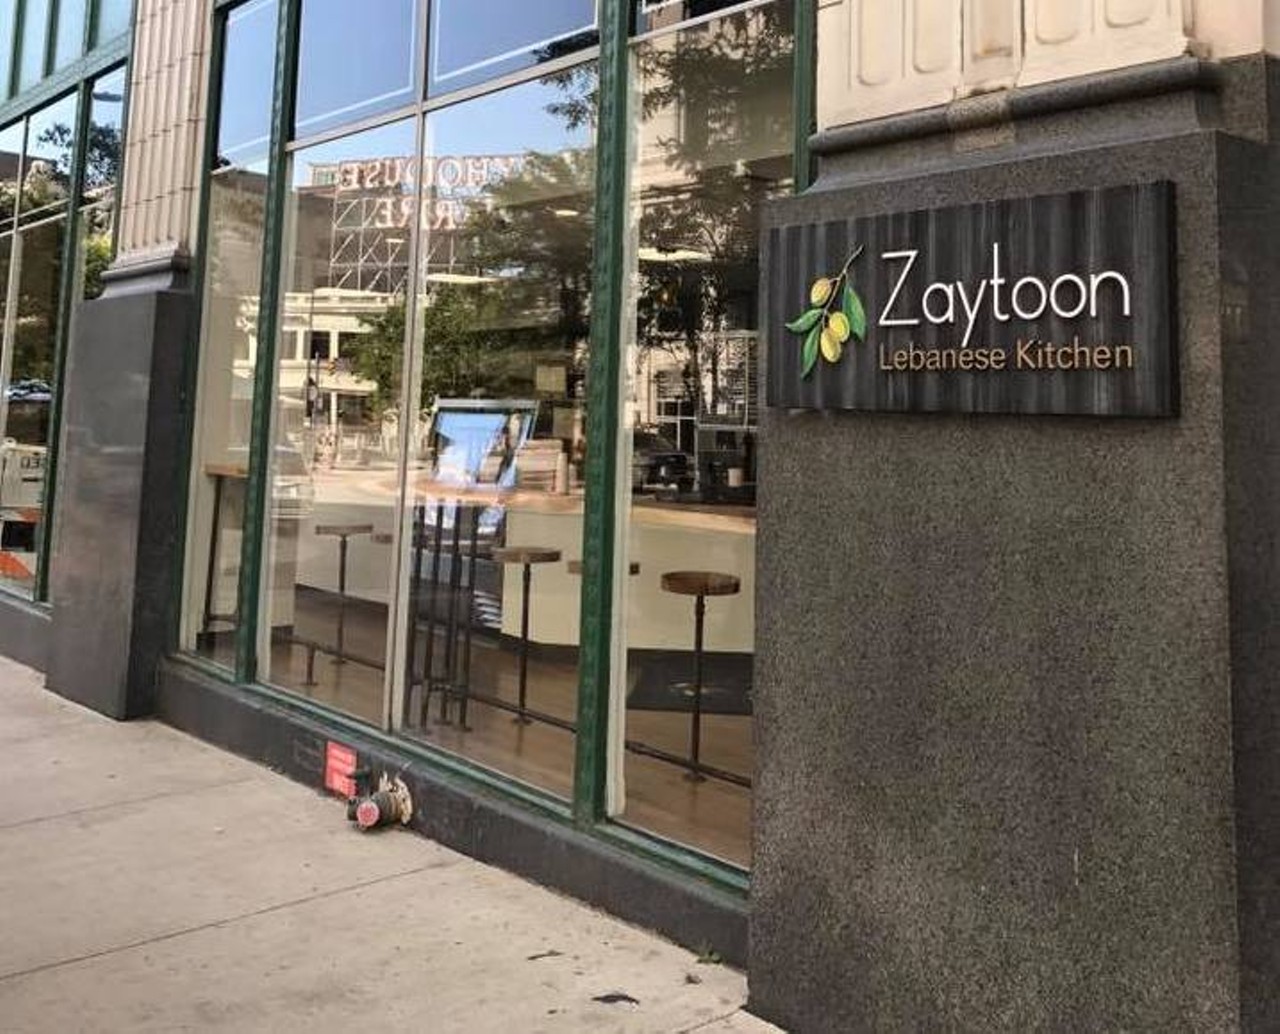  Zaytoon
1150 Huron Rd., Cleveland 
David Ina, the son of the owners of Al&#146;s Deli, worked at his family restaurant to gain experience before opening his own place down the street last year. Zaytoon specializes in Lebanese food like fattoush and shwarma. Try the shish tawook rolled pita for just $7.49.
Photo via Zaytoon/Facebook